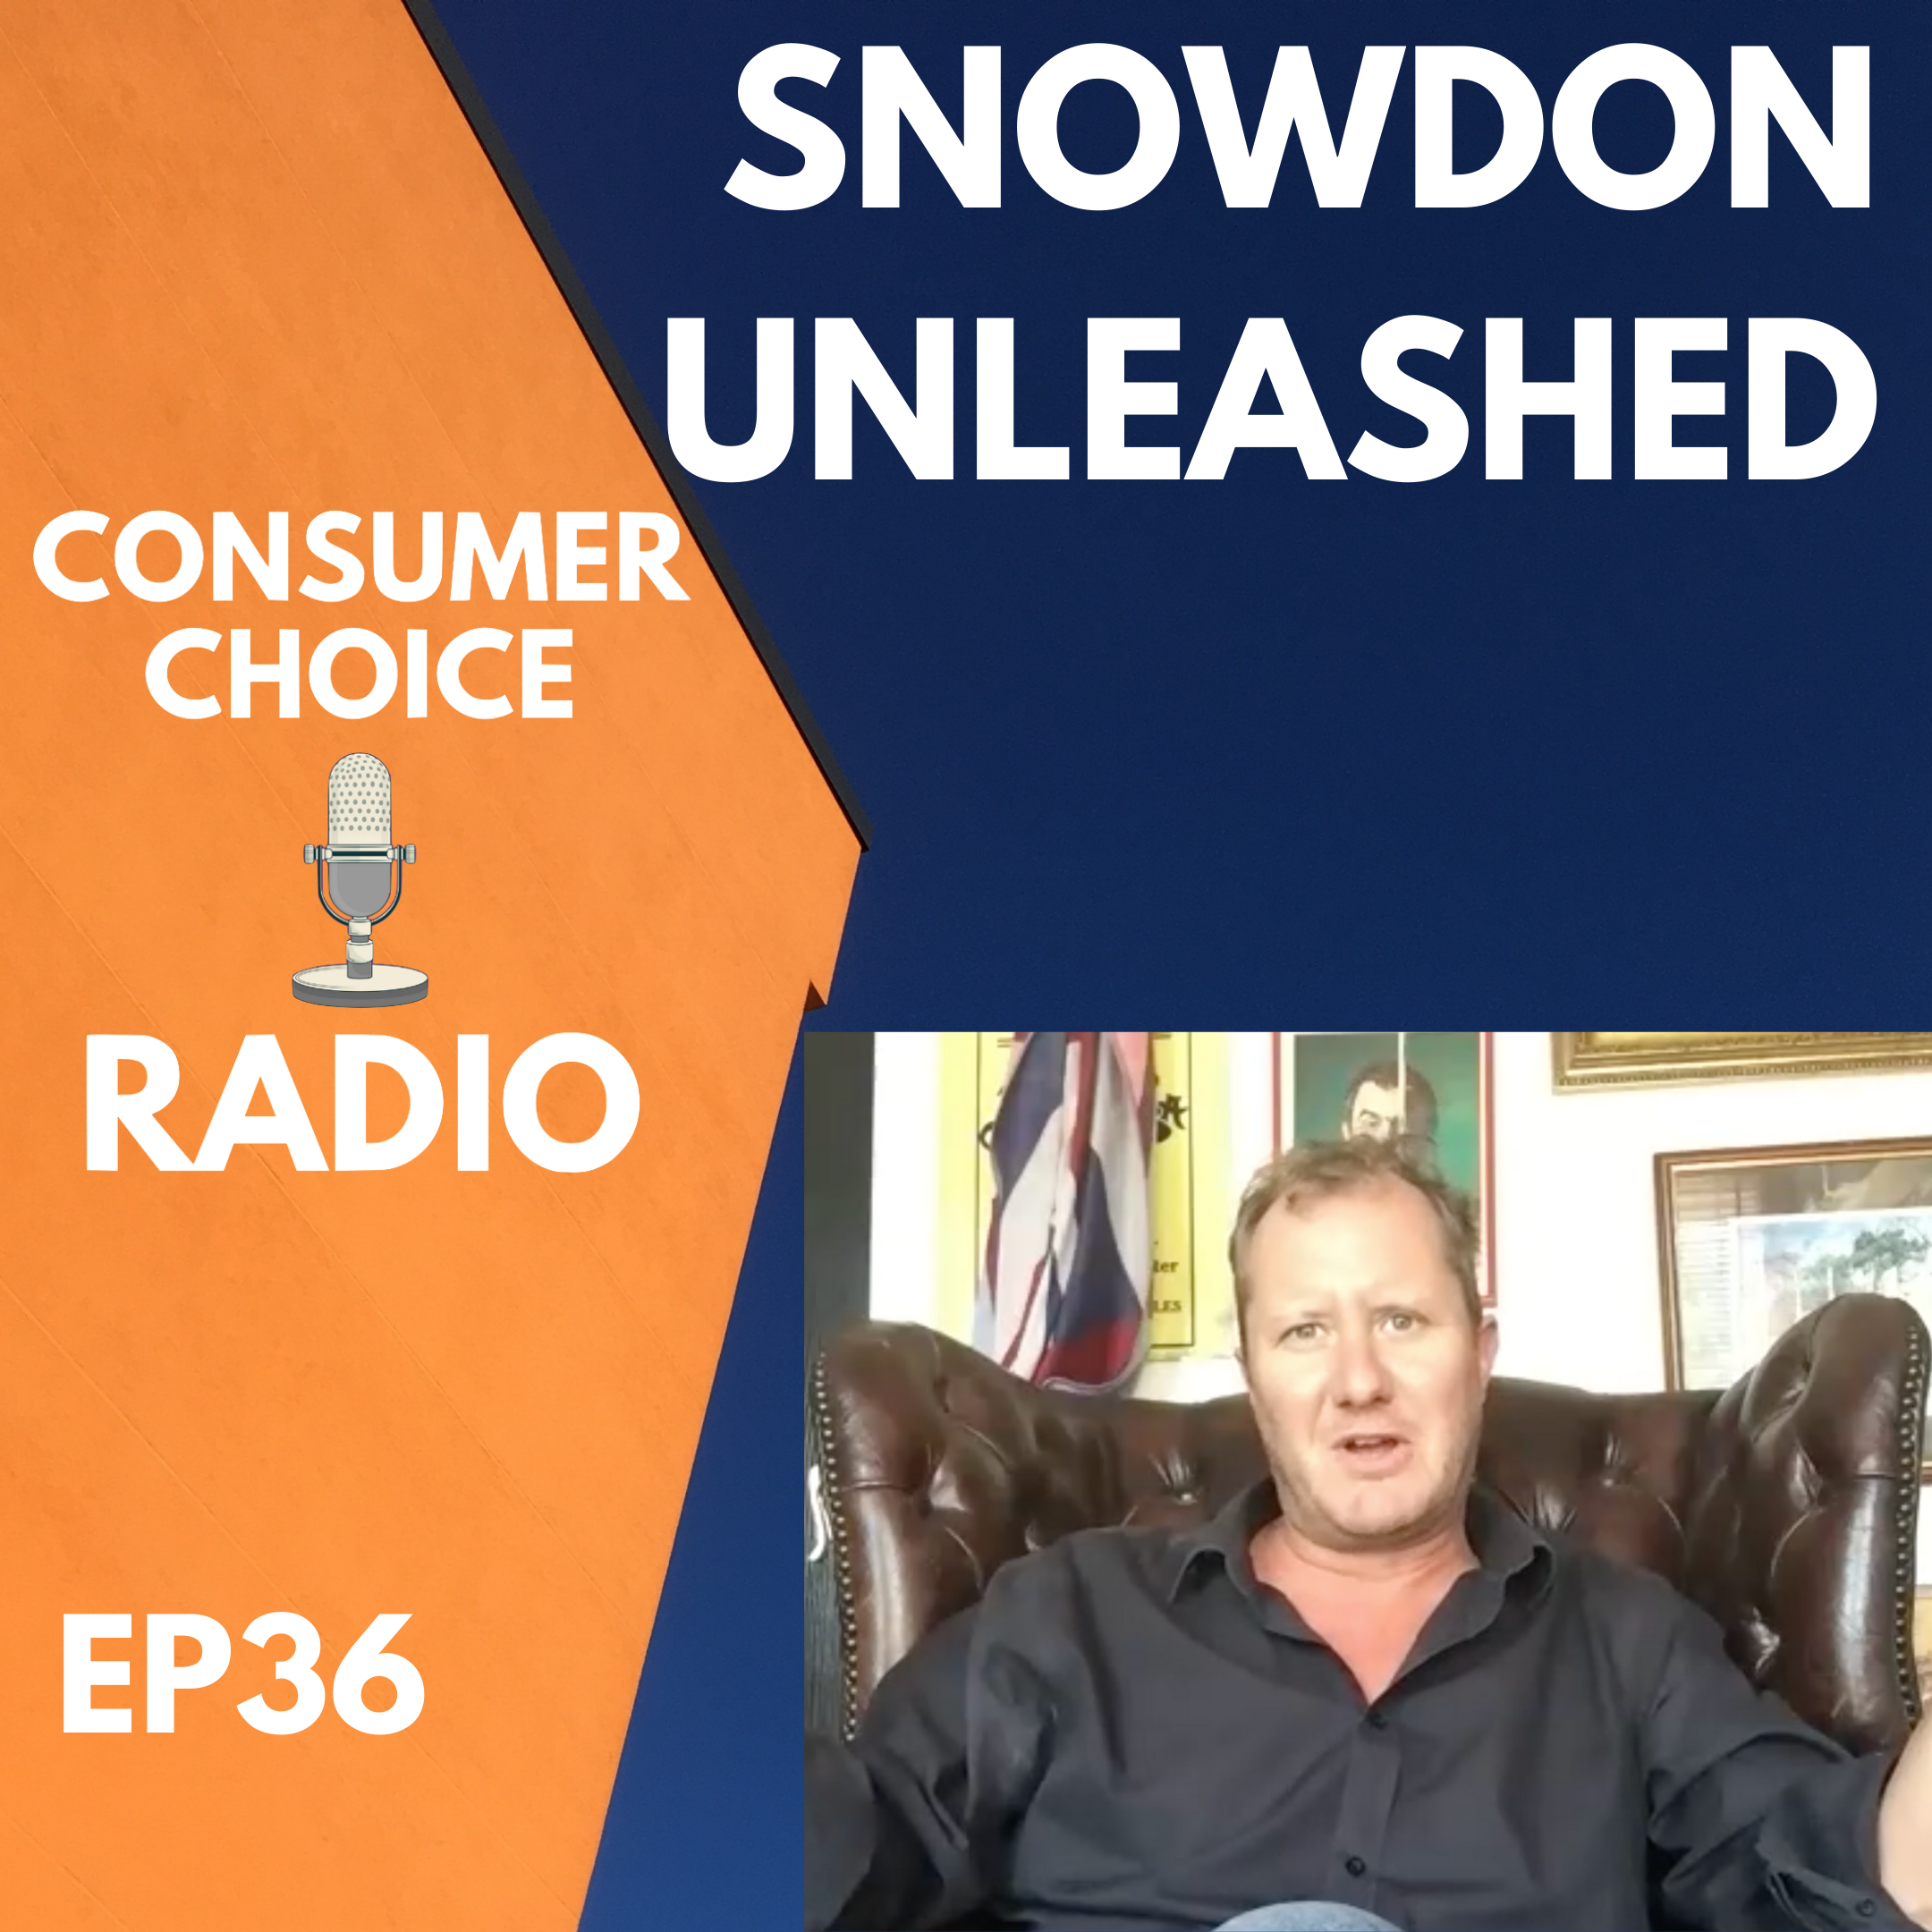 EP36: SNOWDON UNLEASHED and Innovative Agriculture